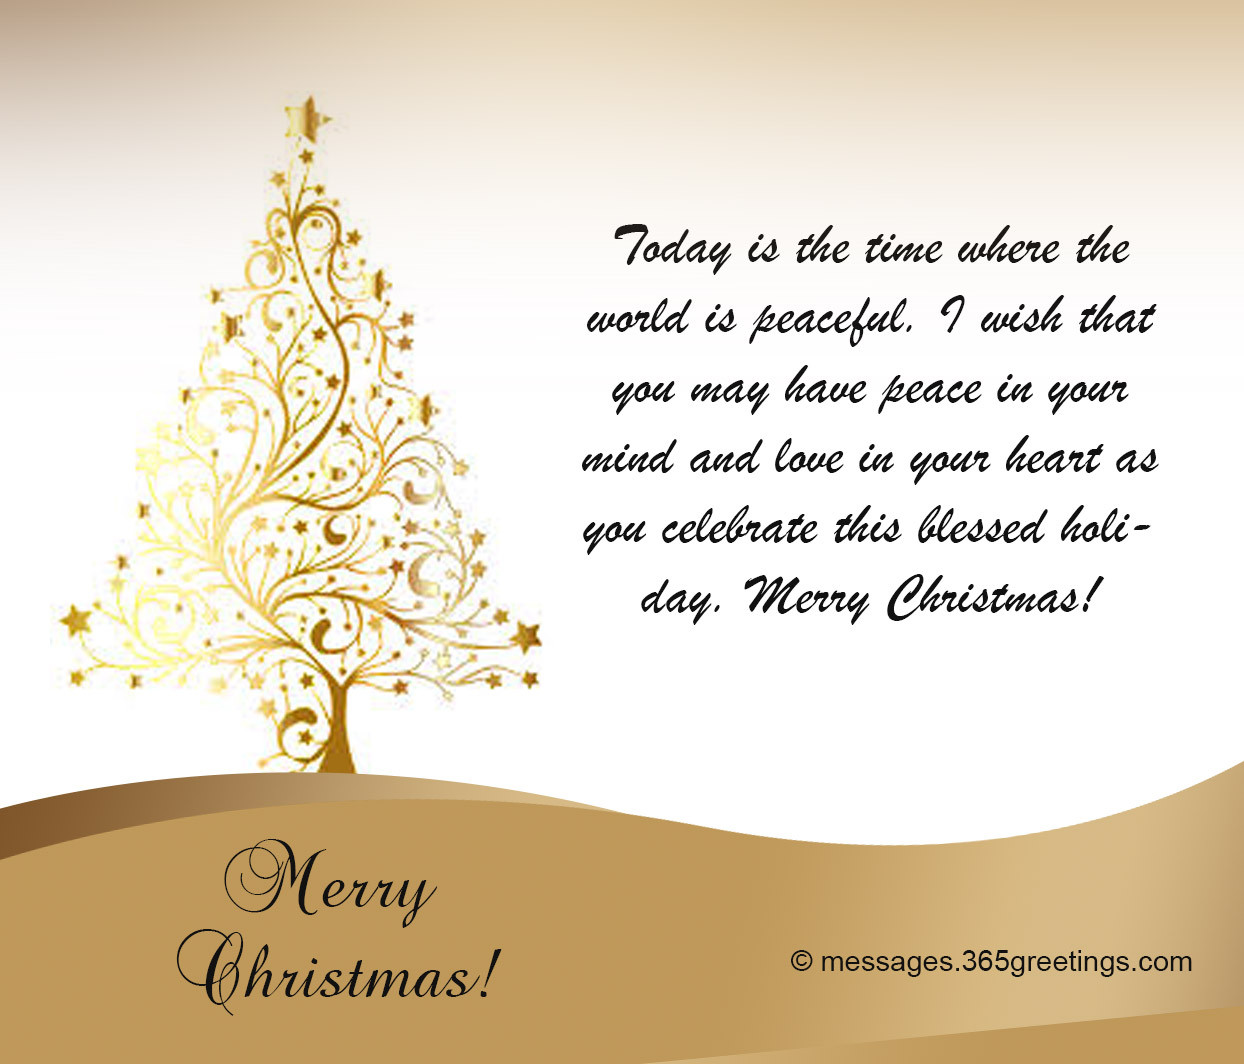 Christmas Card Greetings Quotes
 Best Christmas Card Sayings and Greetings 365greetings